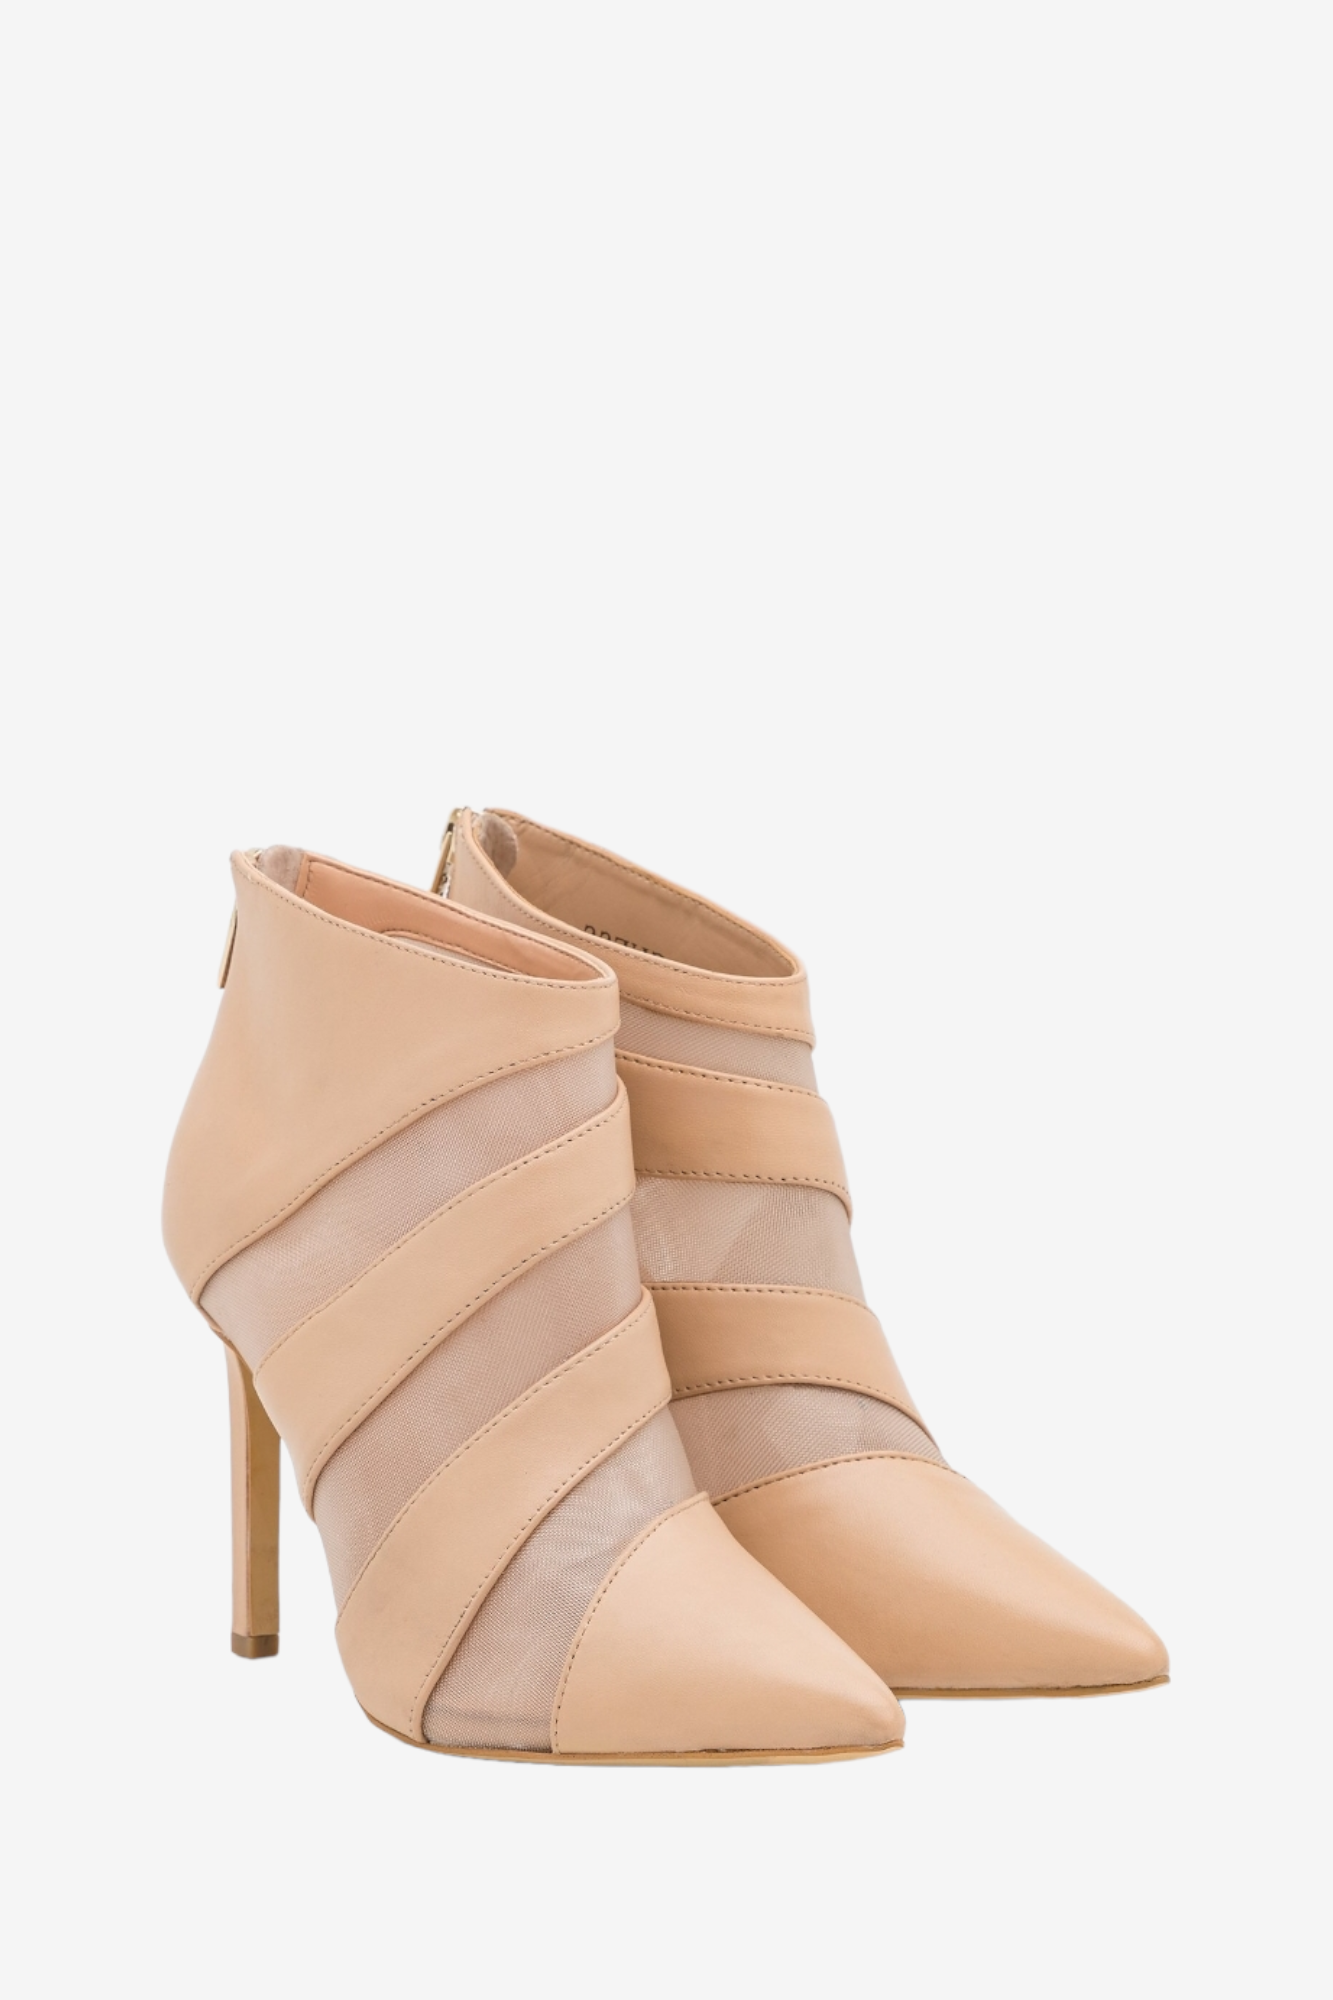 GUESS SYNTHIA NUDE LEATHER HEELED BOOT